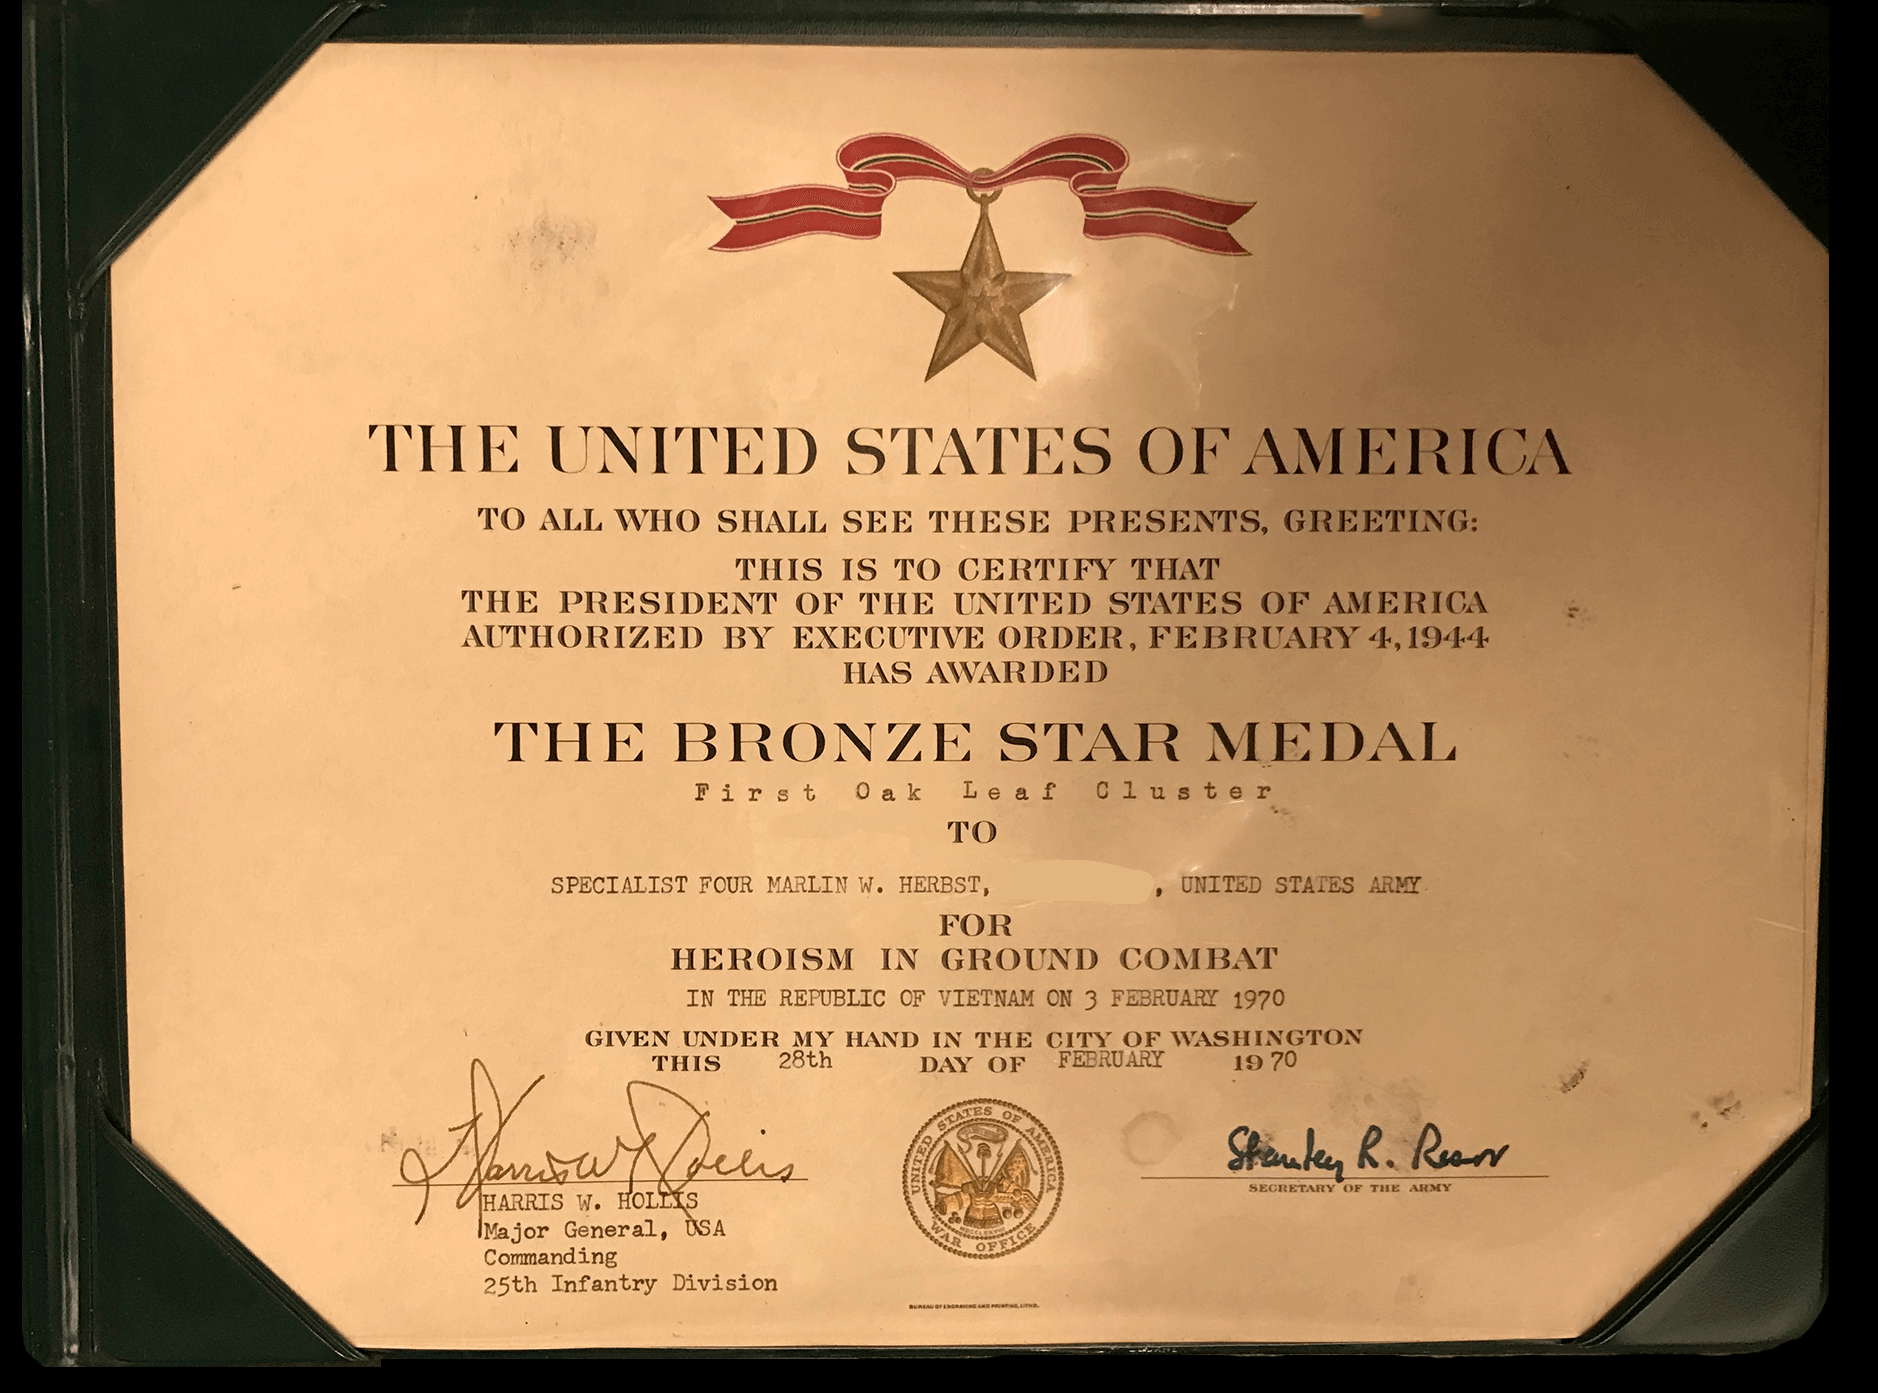 Certificate for a Bronze Star Medal, presented to Marlin Herbst on 2-28-1970.